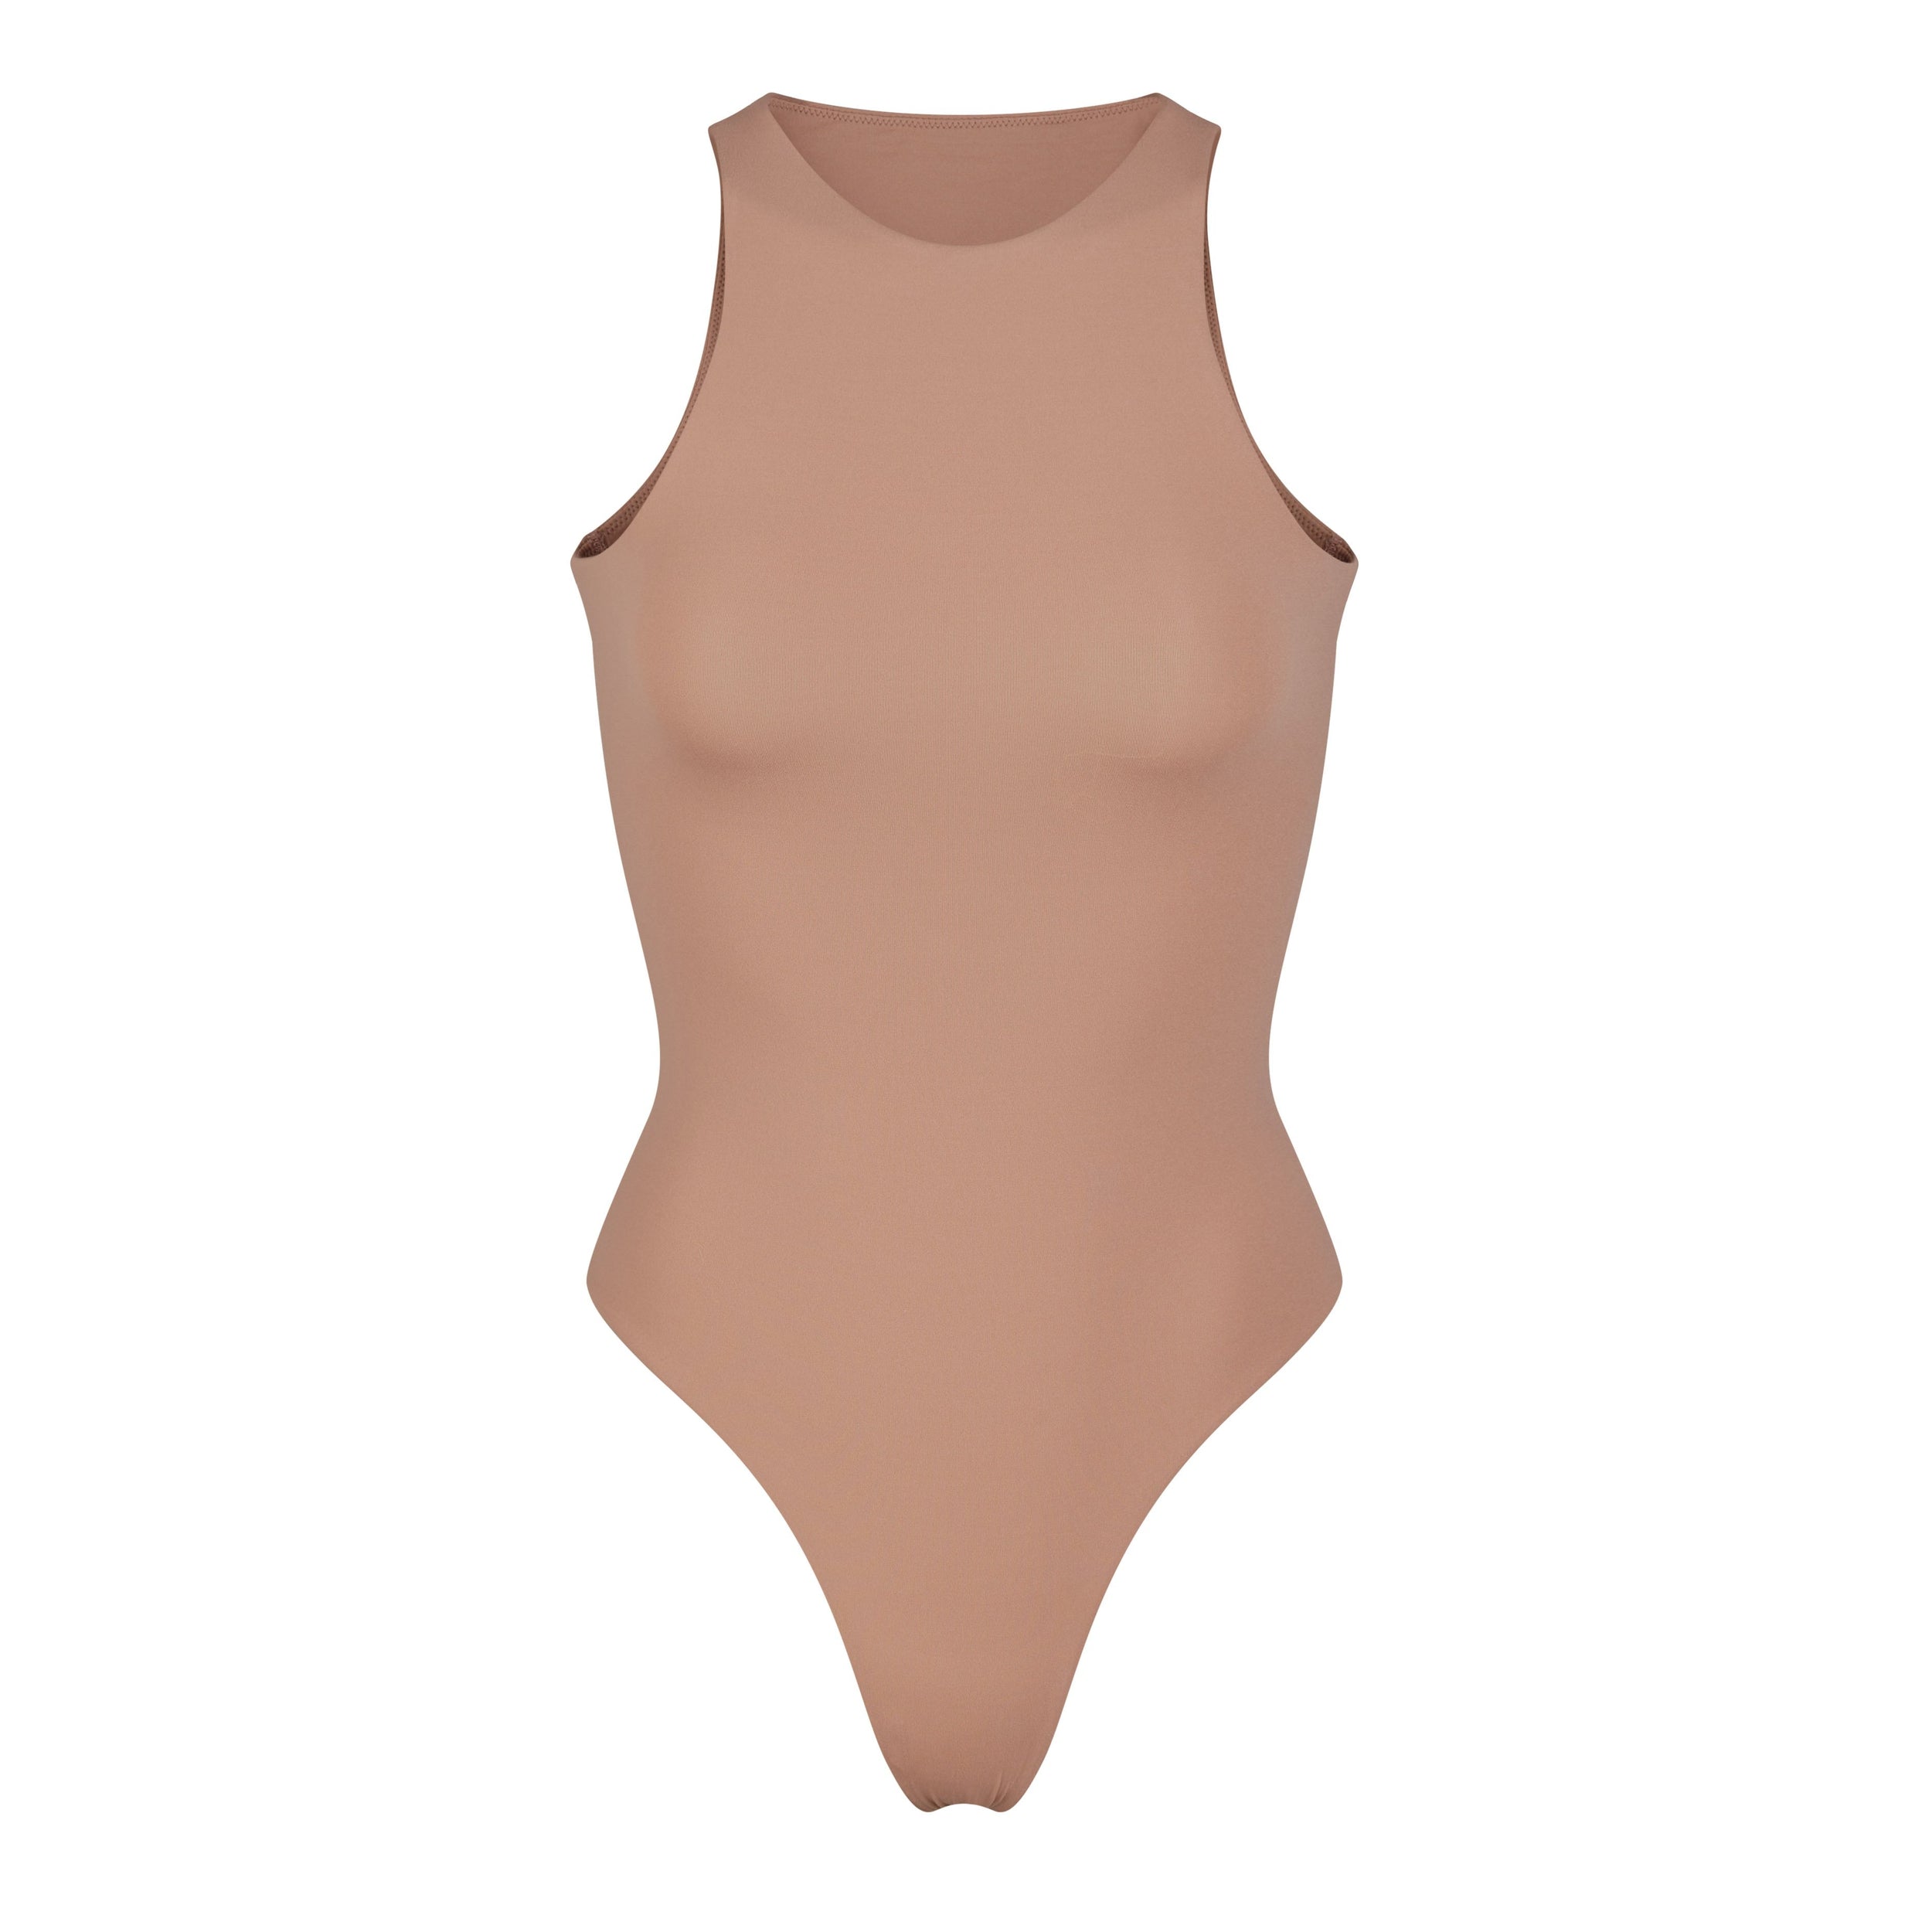 SKIMS Contour Lift Tank in Sienna  Clothes design, Outfit inspo, How to  wear